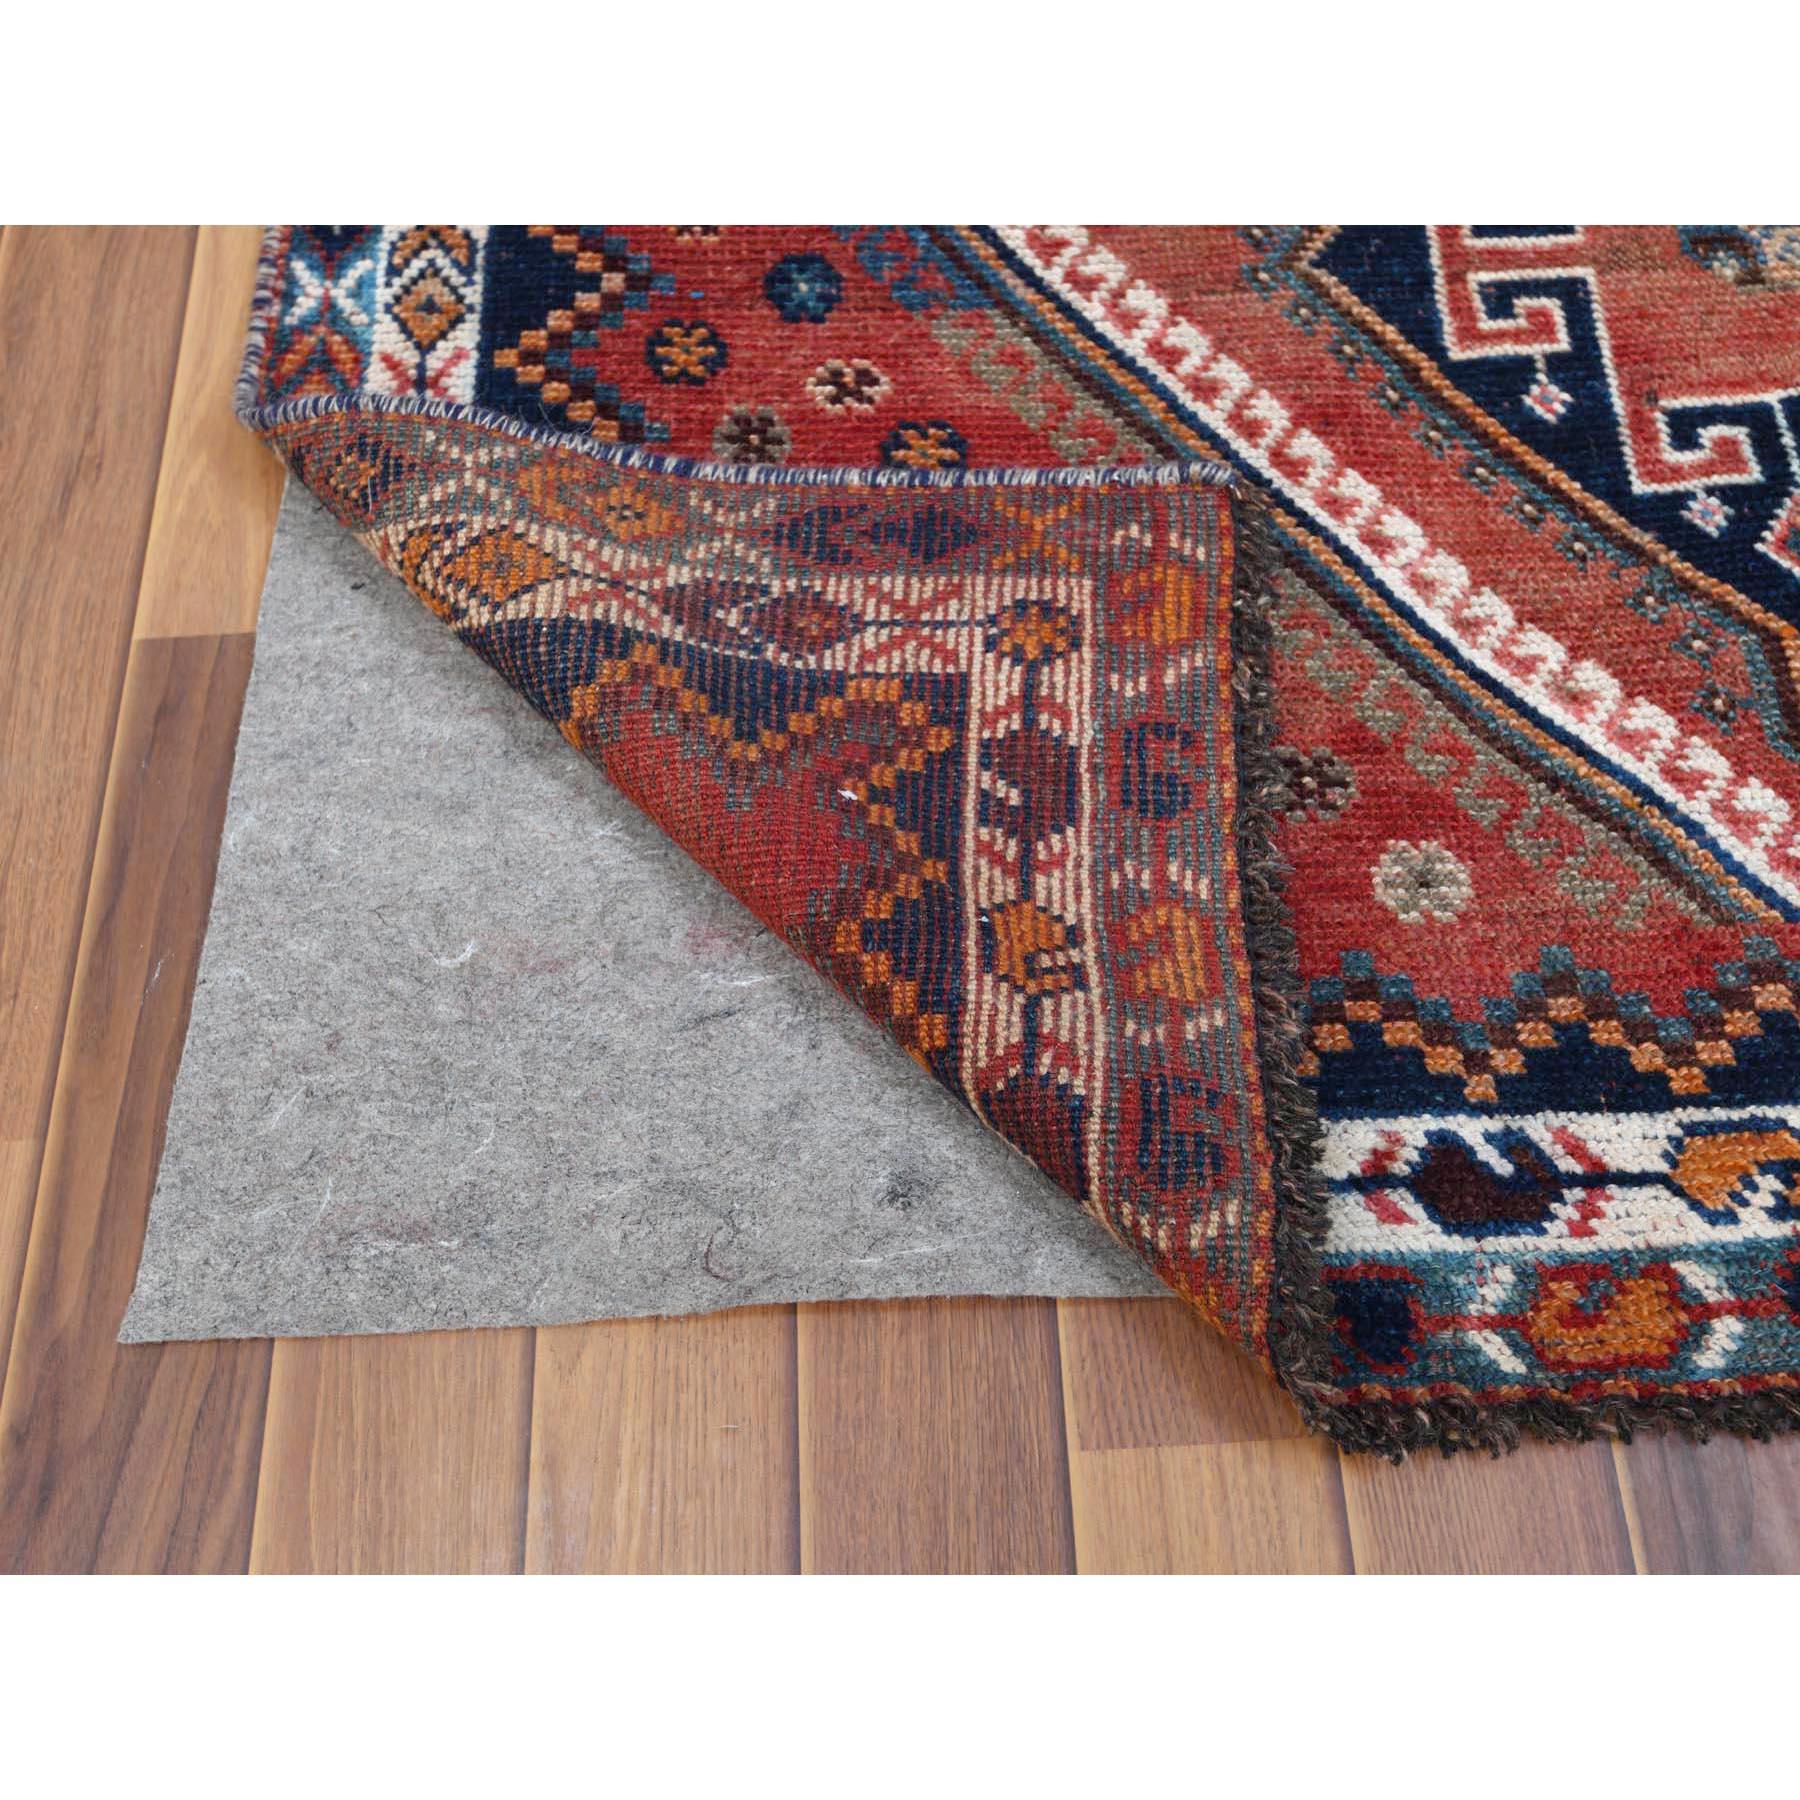 Medieval Bohemian Red Old Persian Shiraz Cropped Down Geometric Design Handmade Rug For Sale